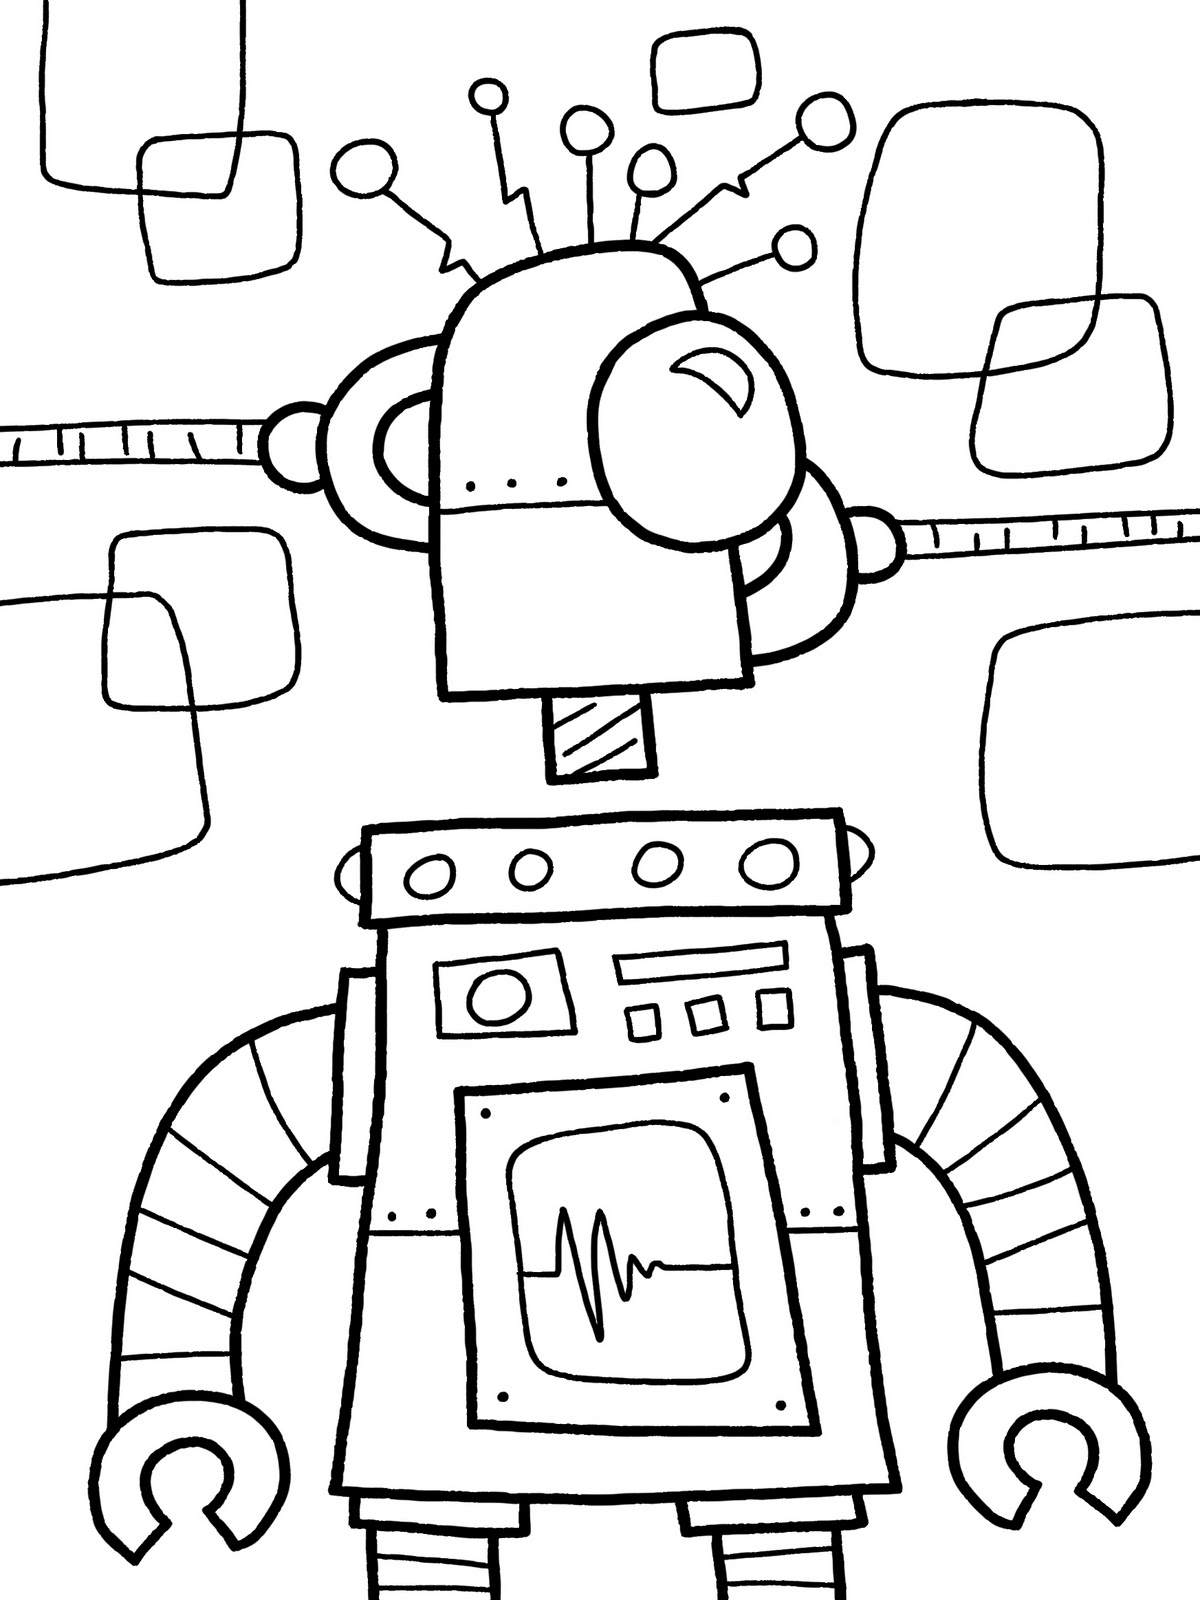  Robot Coloring Pages To Print 8